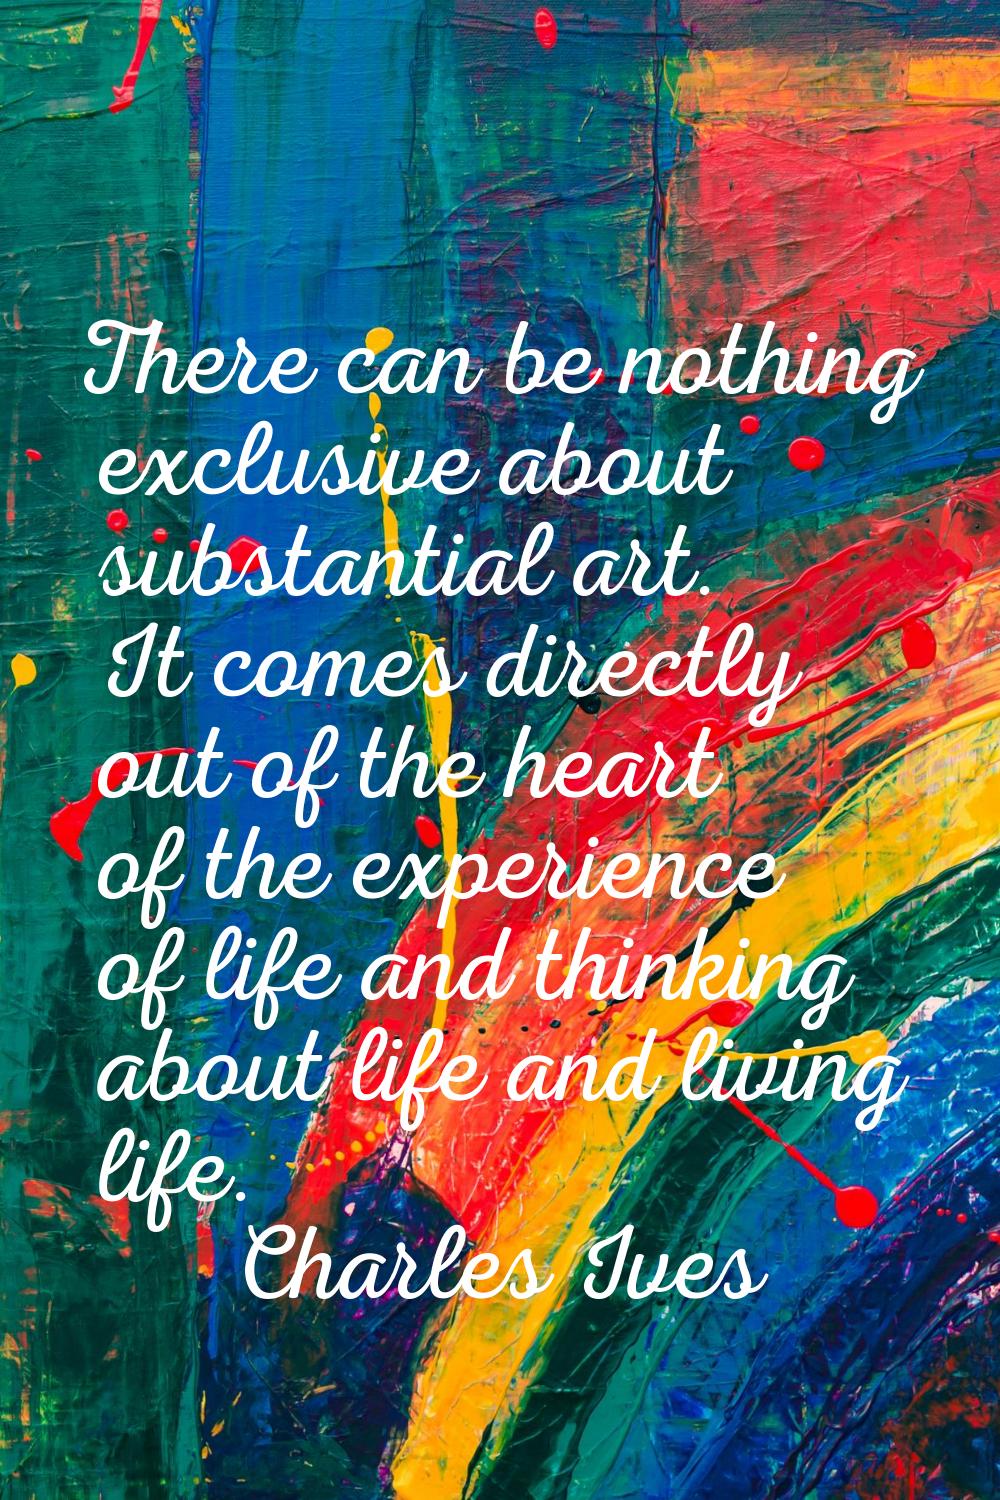 There can be nothing exclusive about substantial art. It comes directly out of the heart of the exp